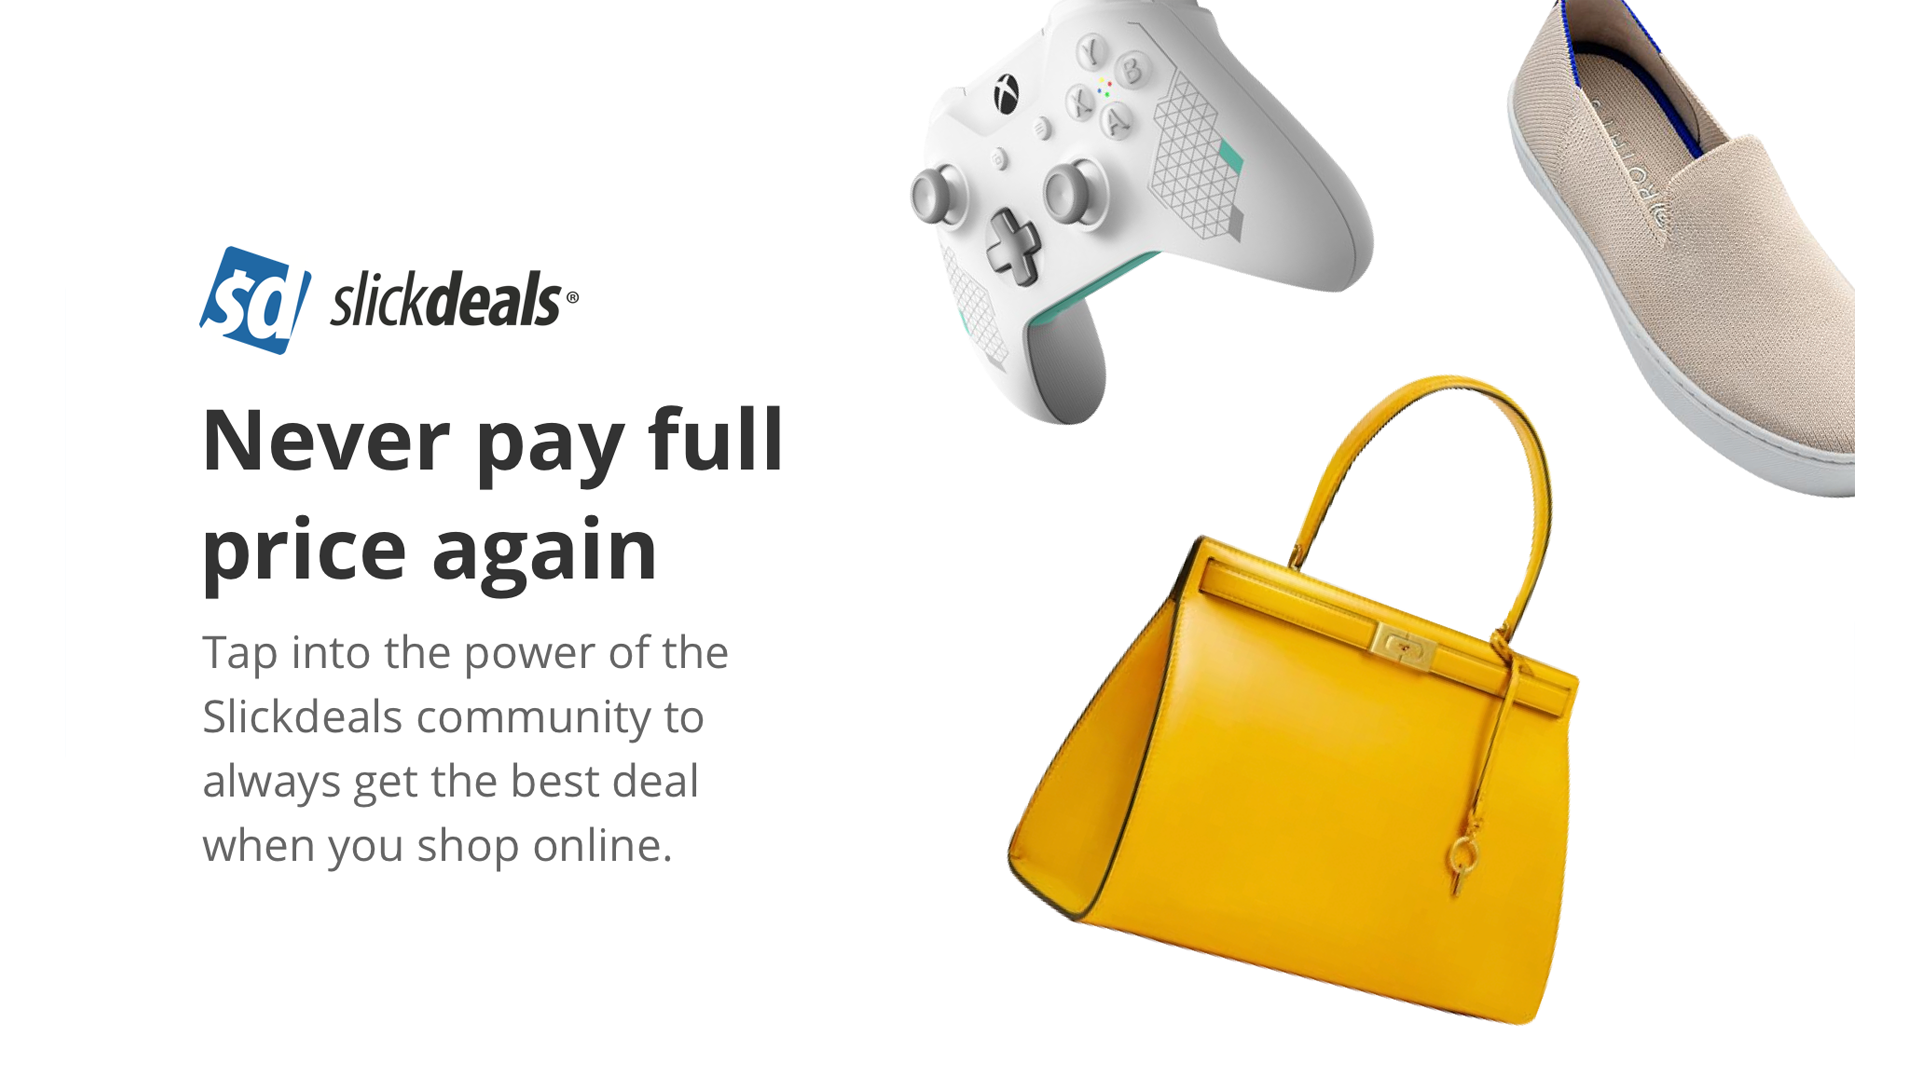 An illustration of Slickdeals saving money on video games, shoes, and handbags.